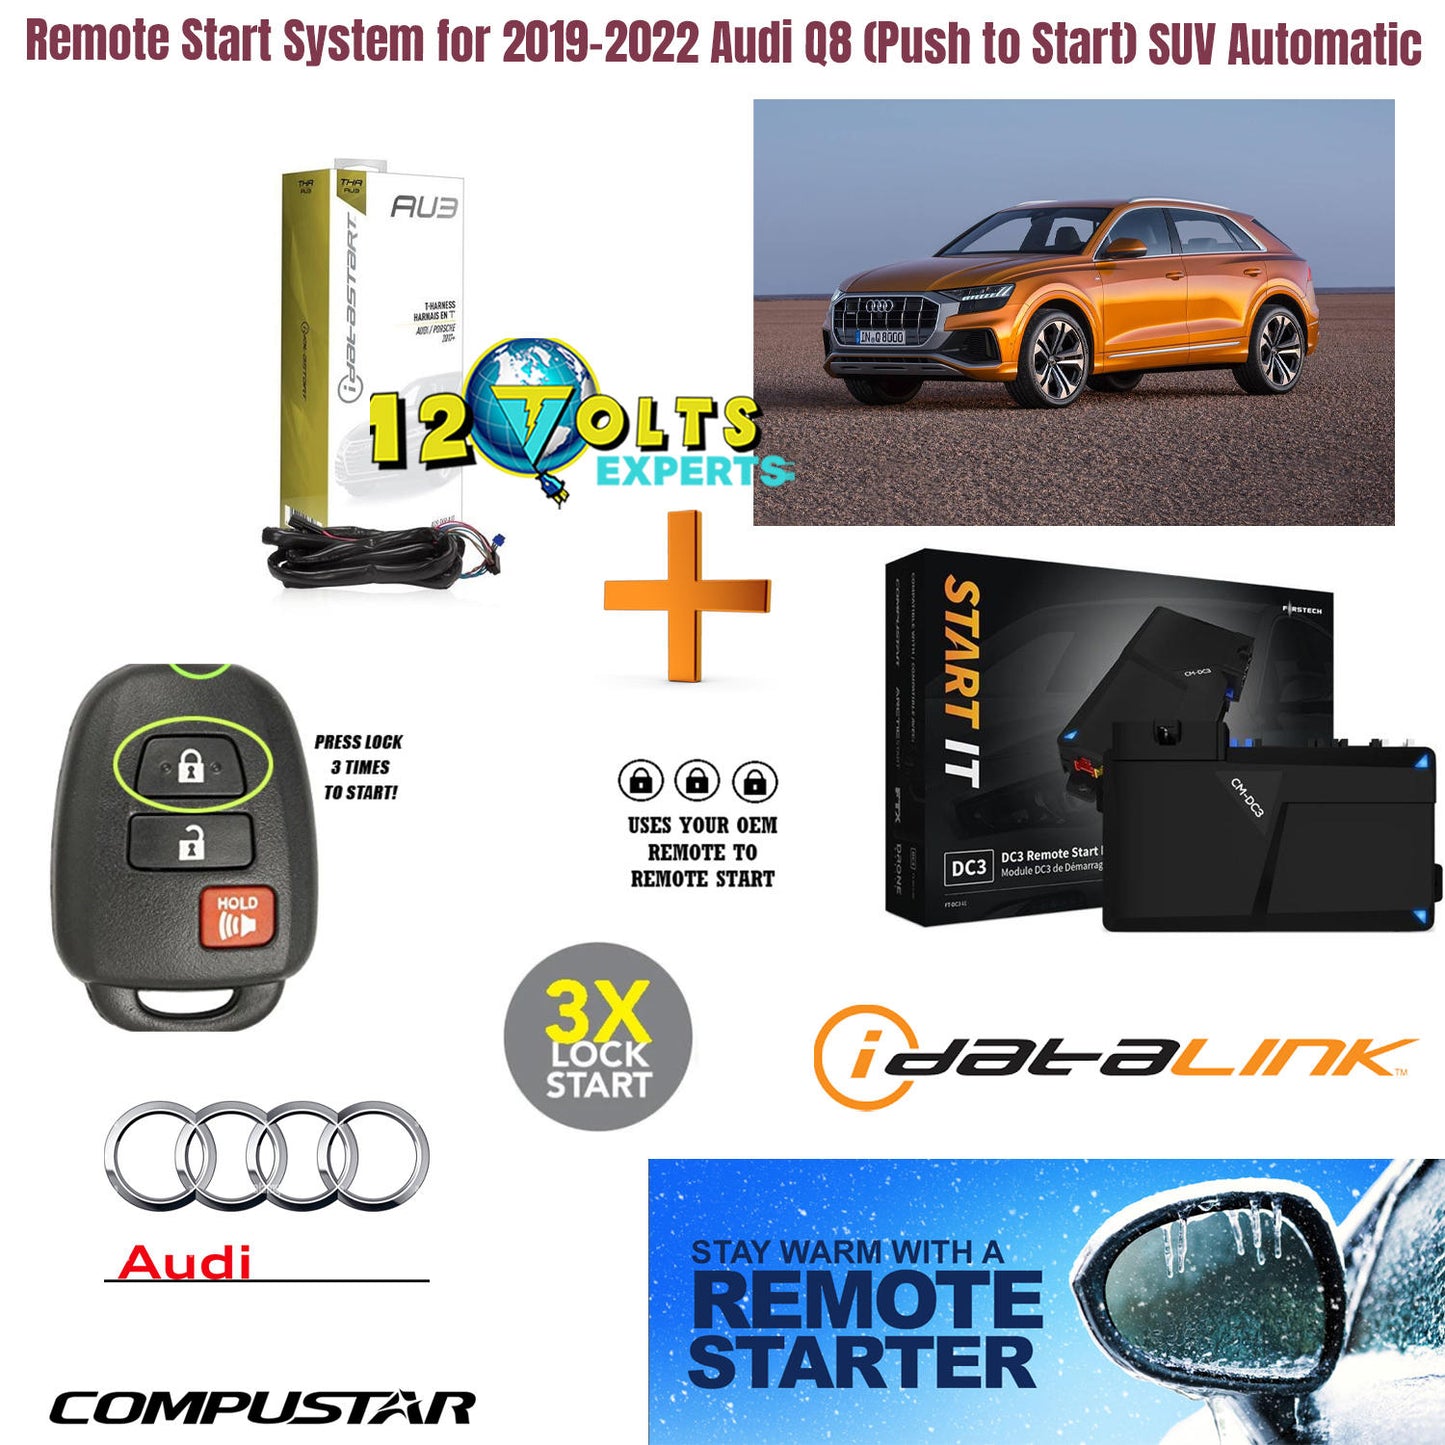 Remote Start System for 2017-2021 Audi Q7 Push-to-Start SUV Automatic